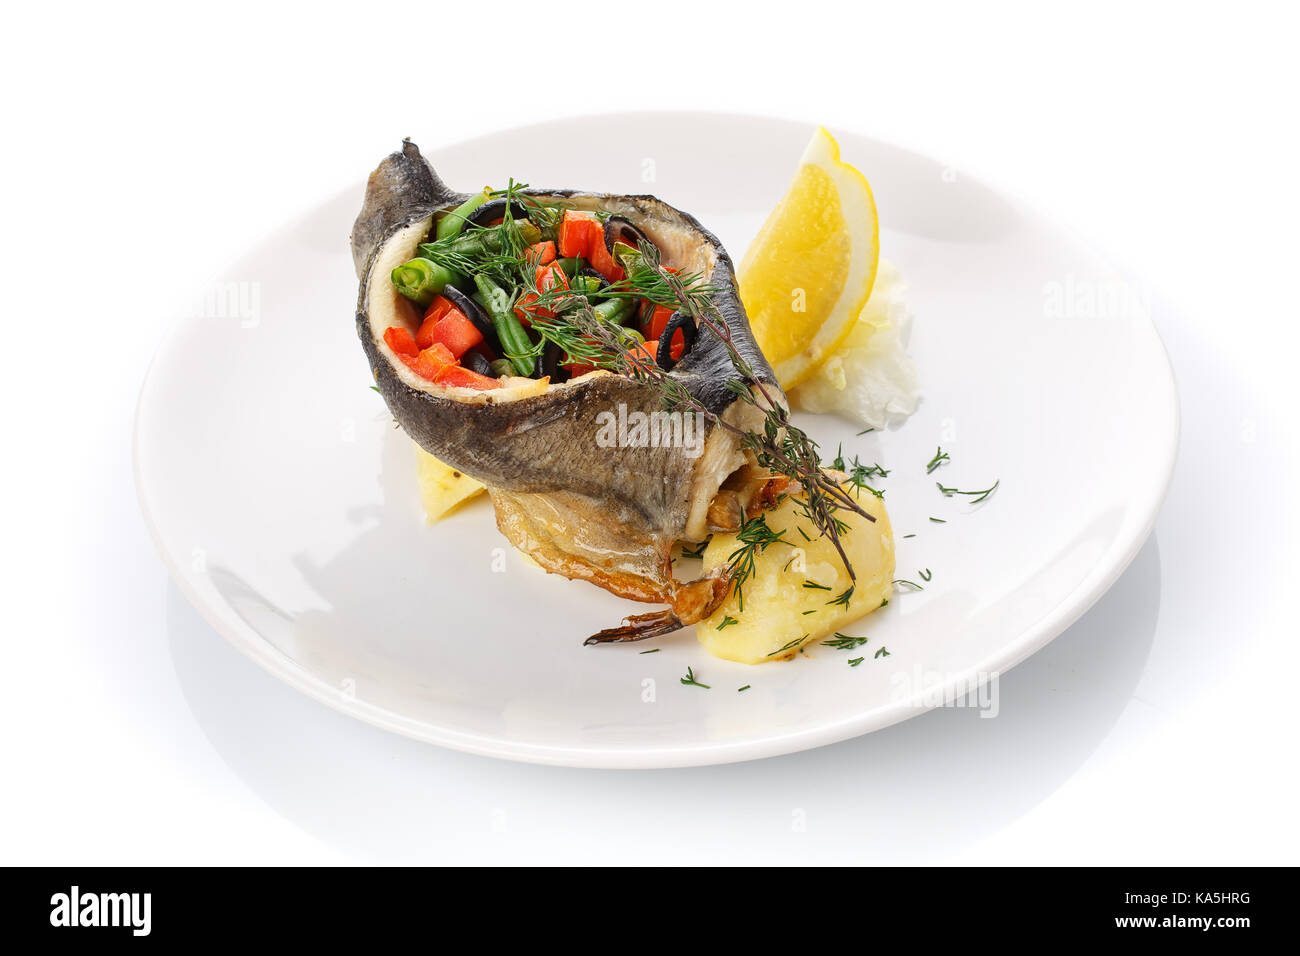 Delicious lunch. Stuffed fish with vegetables Stock Photo